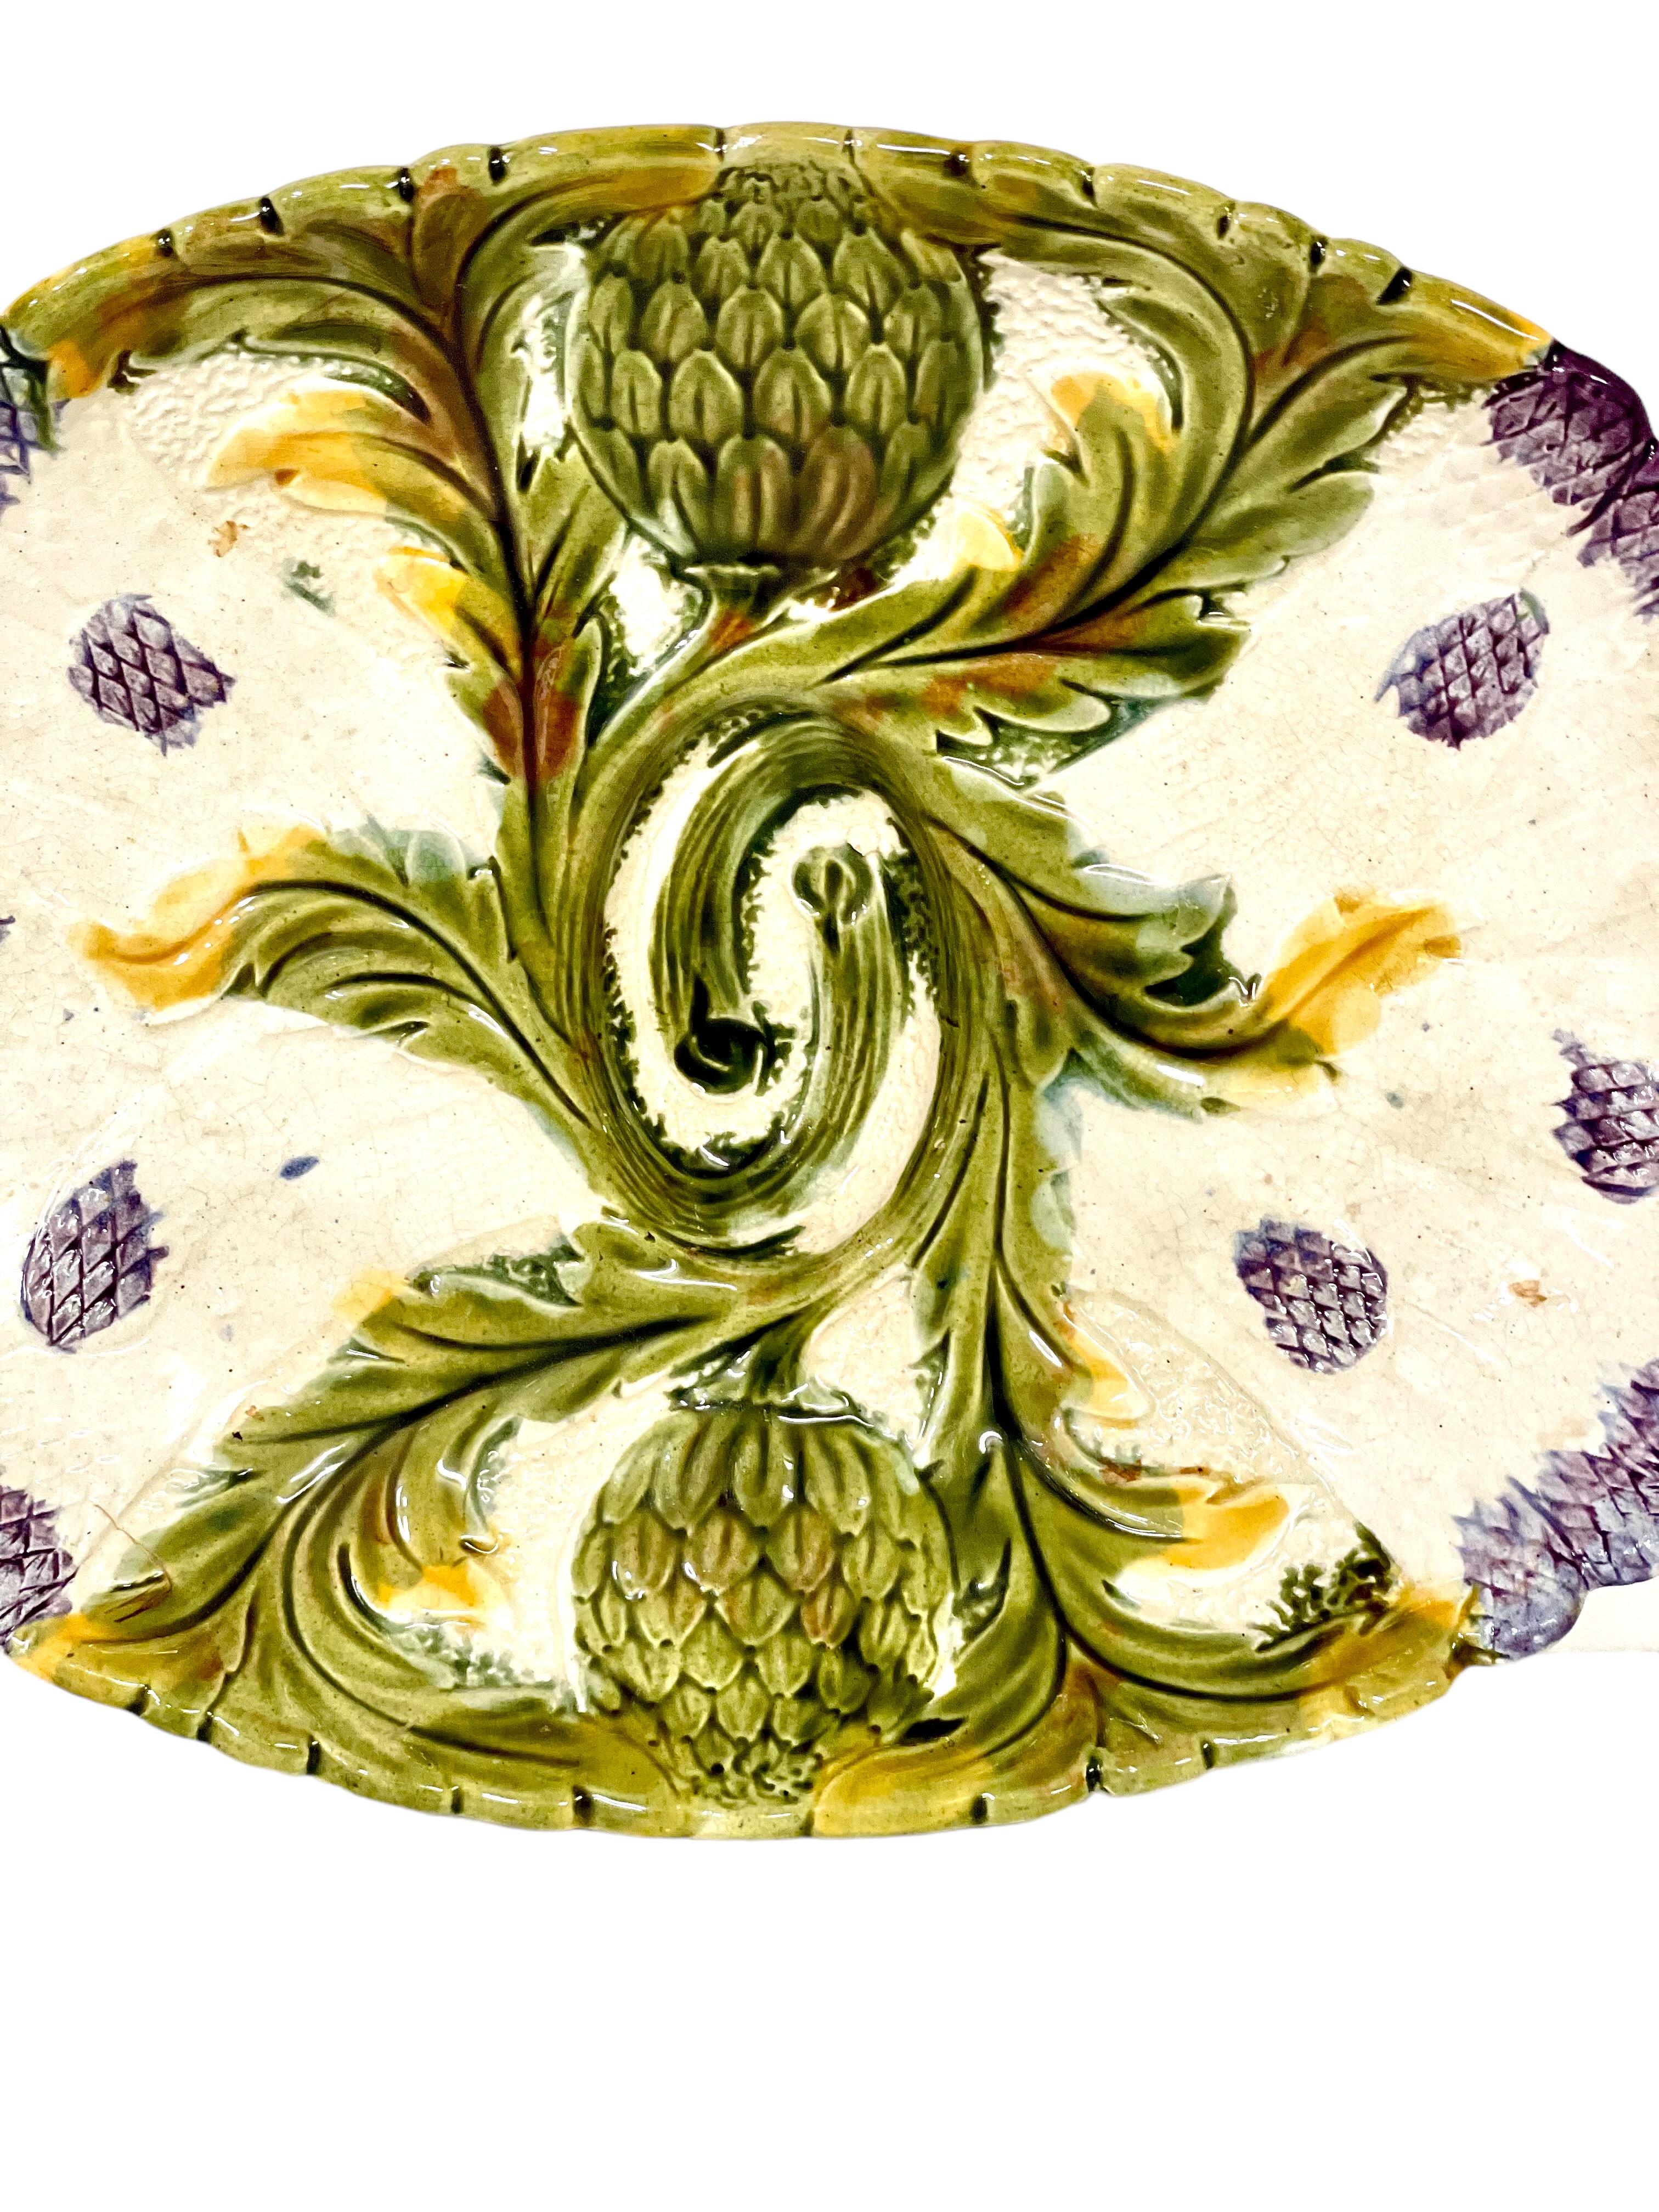 Art Nouveau 19th Century French Oval Shaped Majolica Asparagus Serving Platter For Sale